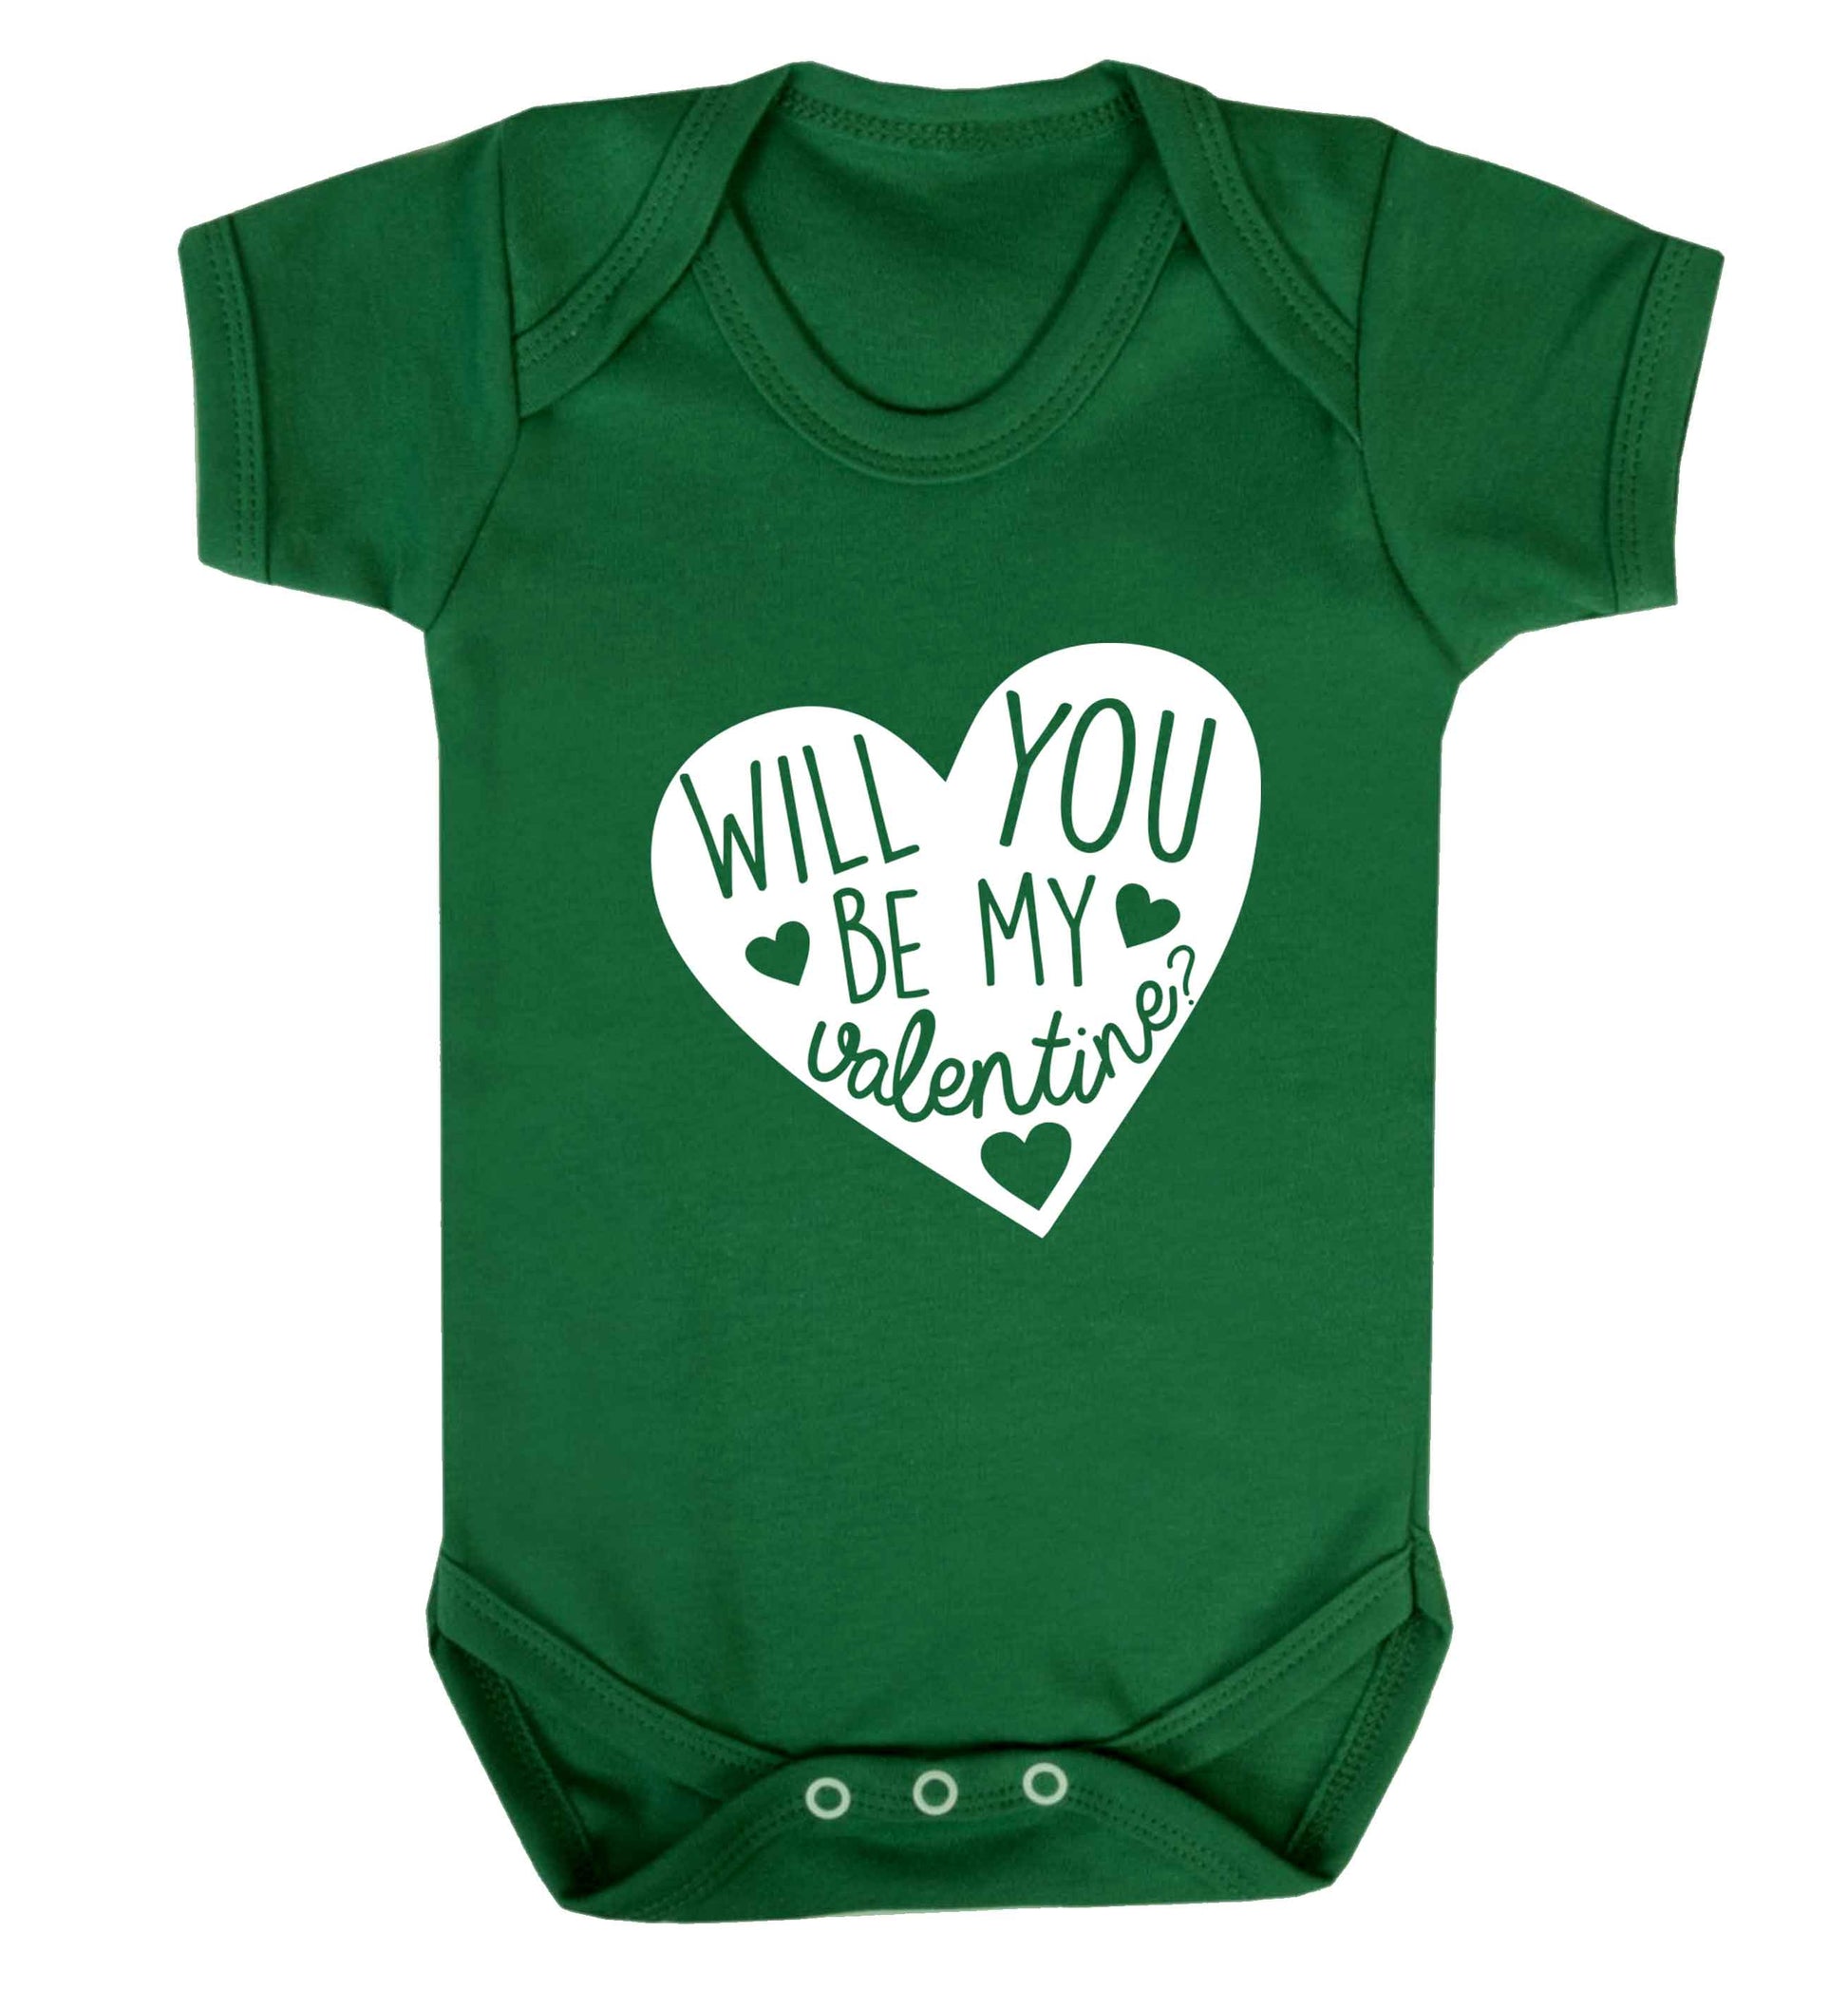 Will you be my valentine? baby vest green 18-24 months